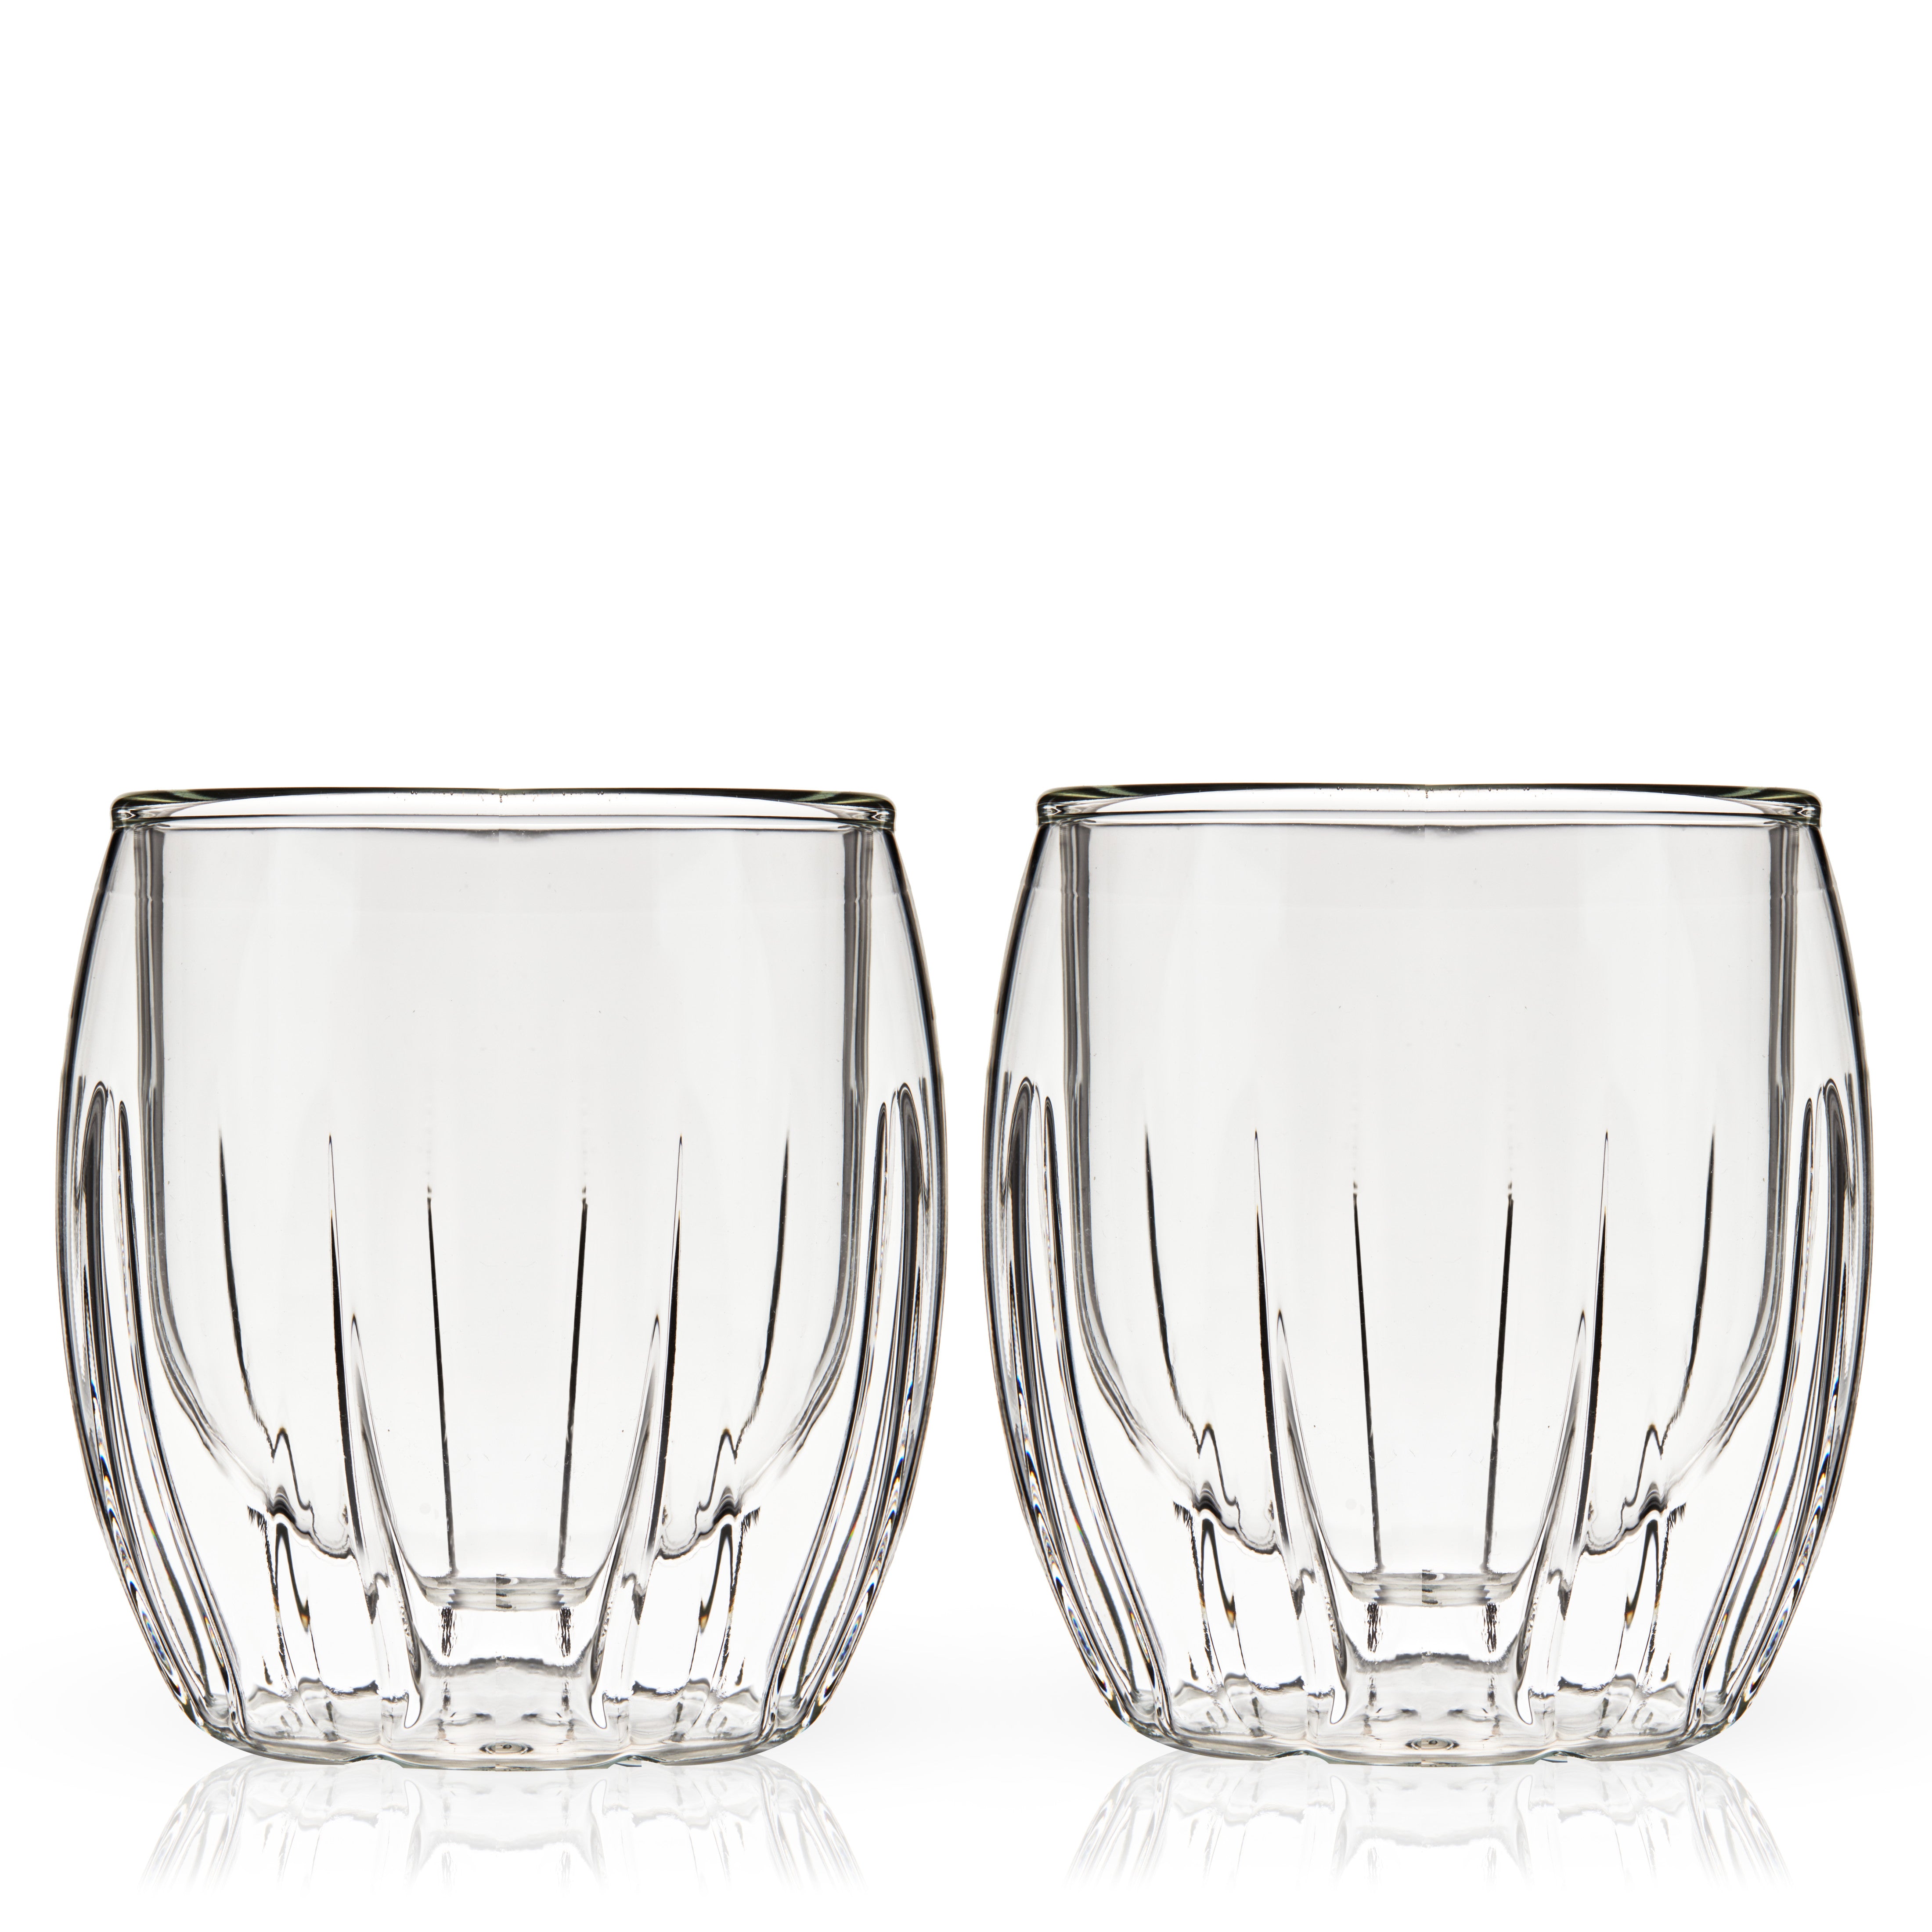 Minimal Double Wall Insulated Glasses